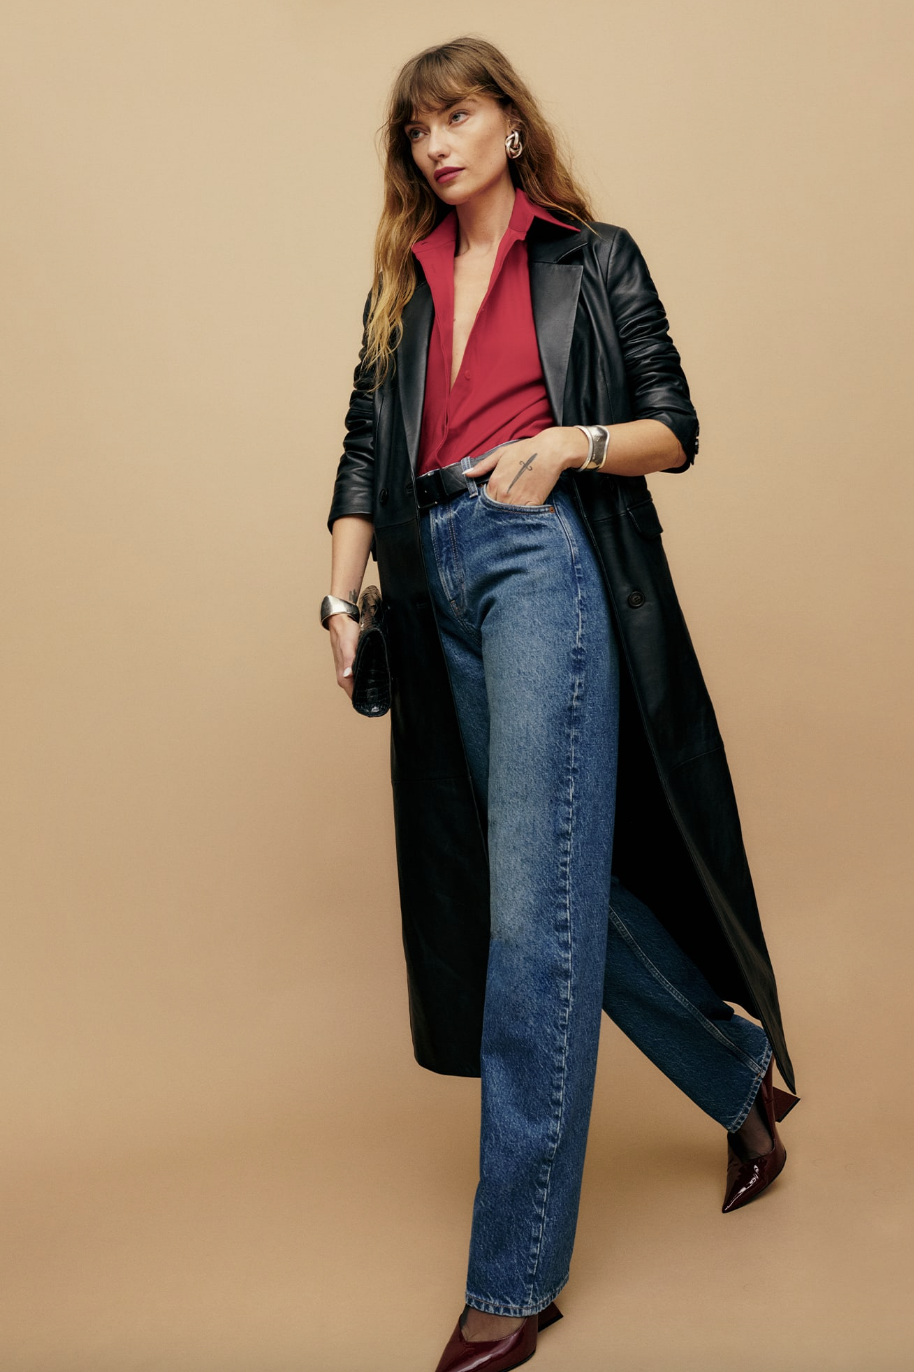 https://hips.hearstapps.com/vader-prod.s3.amazonaws.com/1705666355-best-jeans-for-women-reformation-65aa66faa376b.png?crop=0.9092113982770046xw:1xh;center,top&resize=980:*